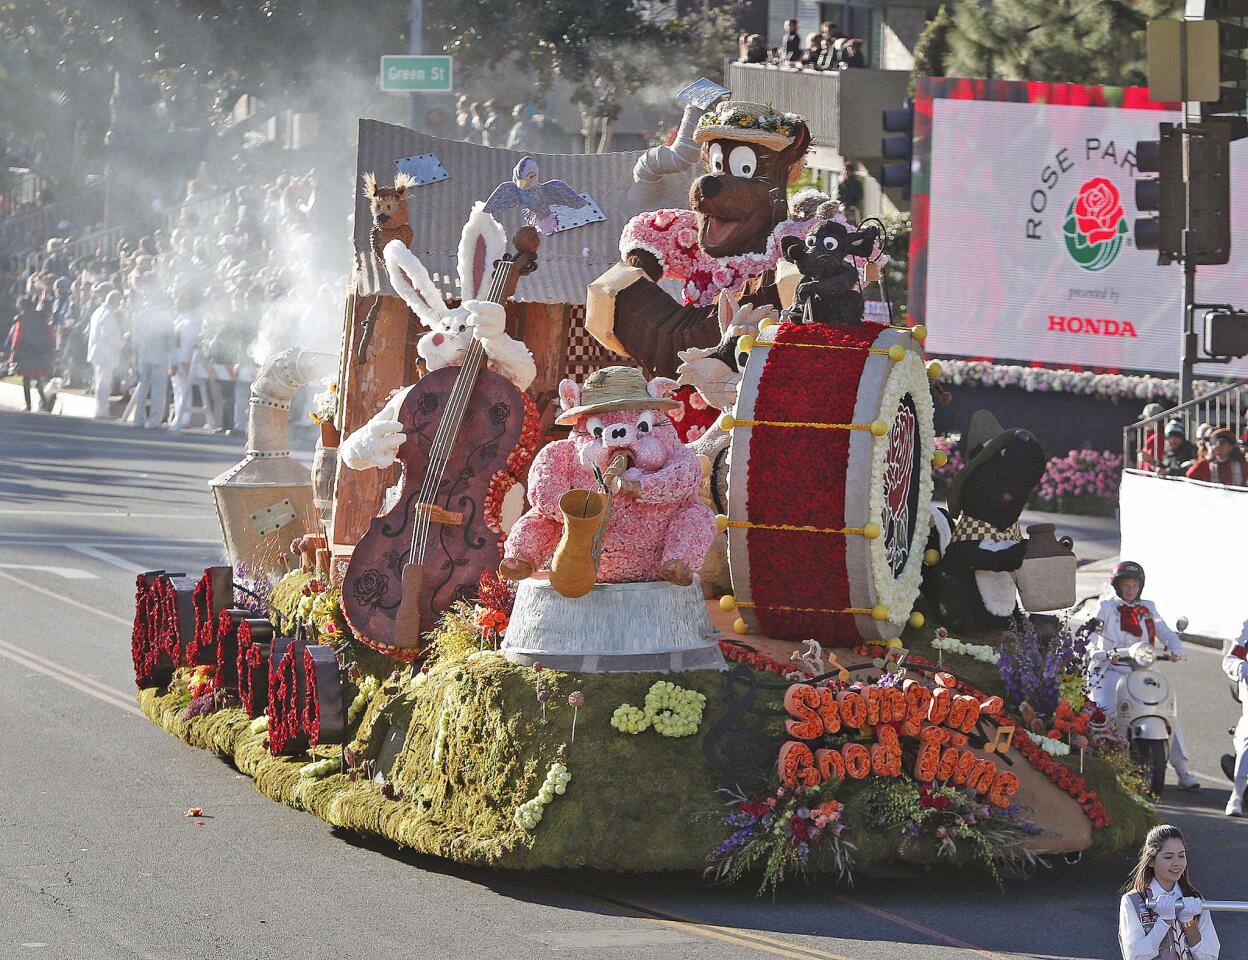 The City of Burbank float, built by the Burbank Tournament of Roses Association entitled "Stompin' Good Time," and winner of the Animation Award, starts its parade in front of the grand stands at the 2019 Rose Parade in Pasadena on Tuesday, January 1, 2019.